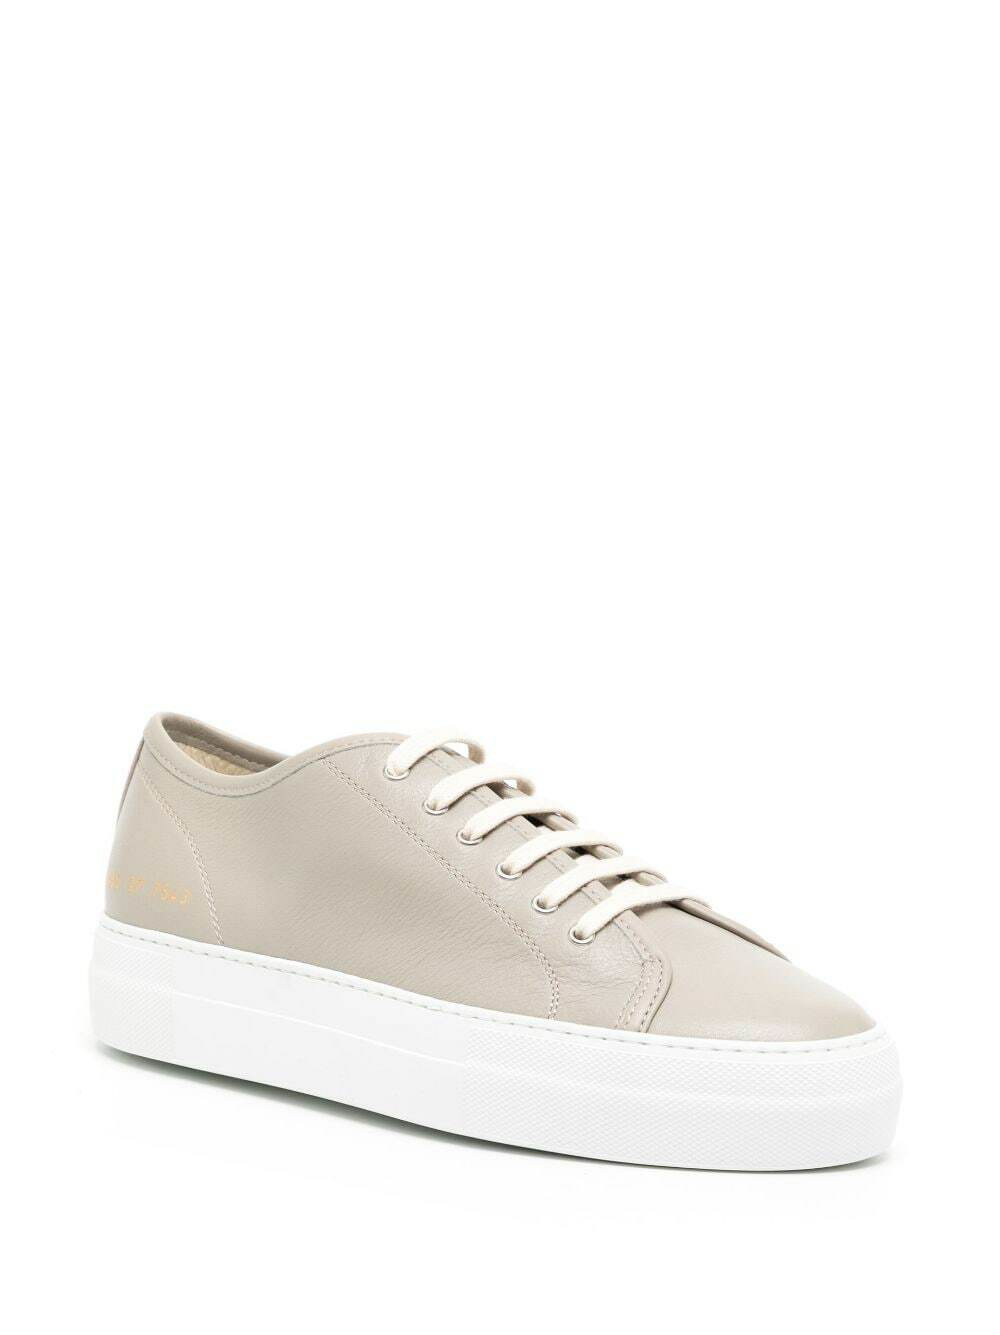 COMMON PROJECTS - Tournament Low Leather Sneakers